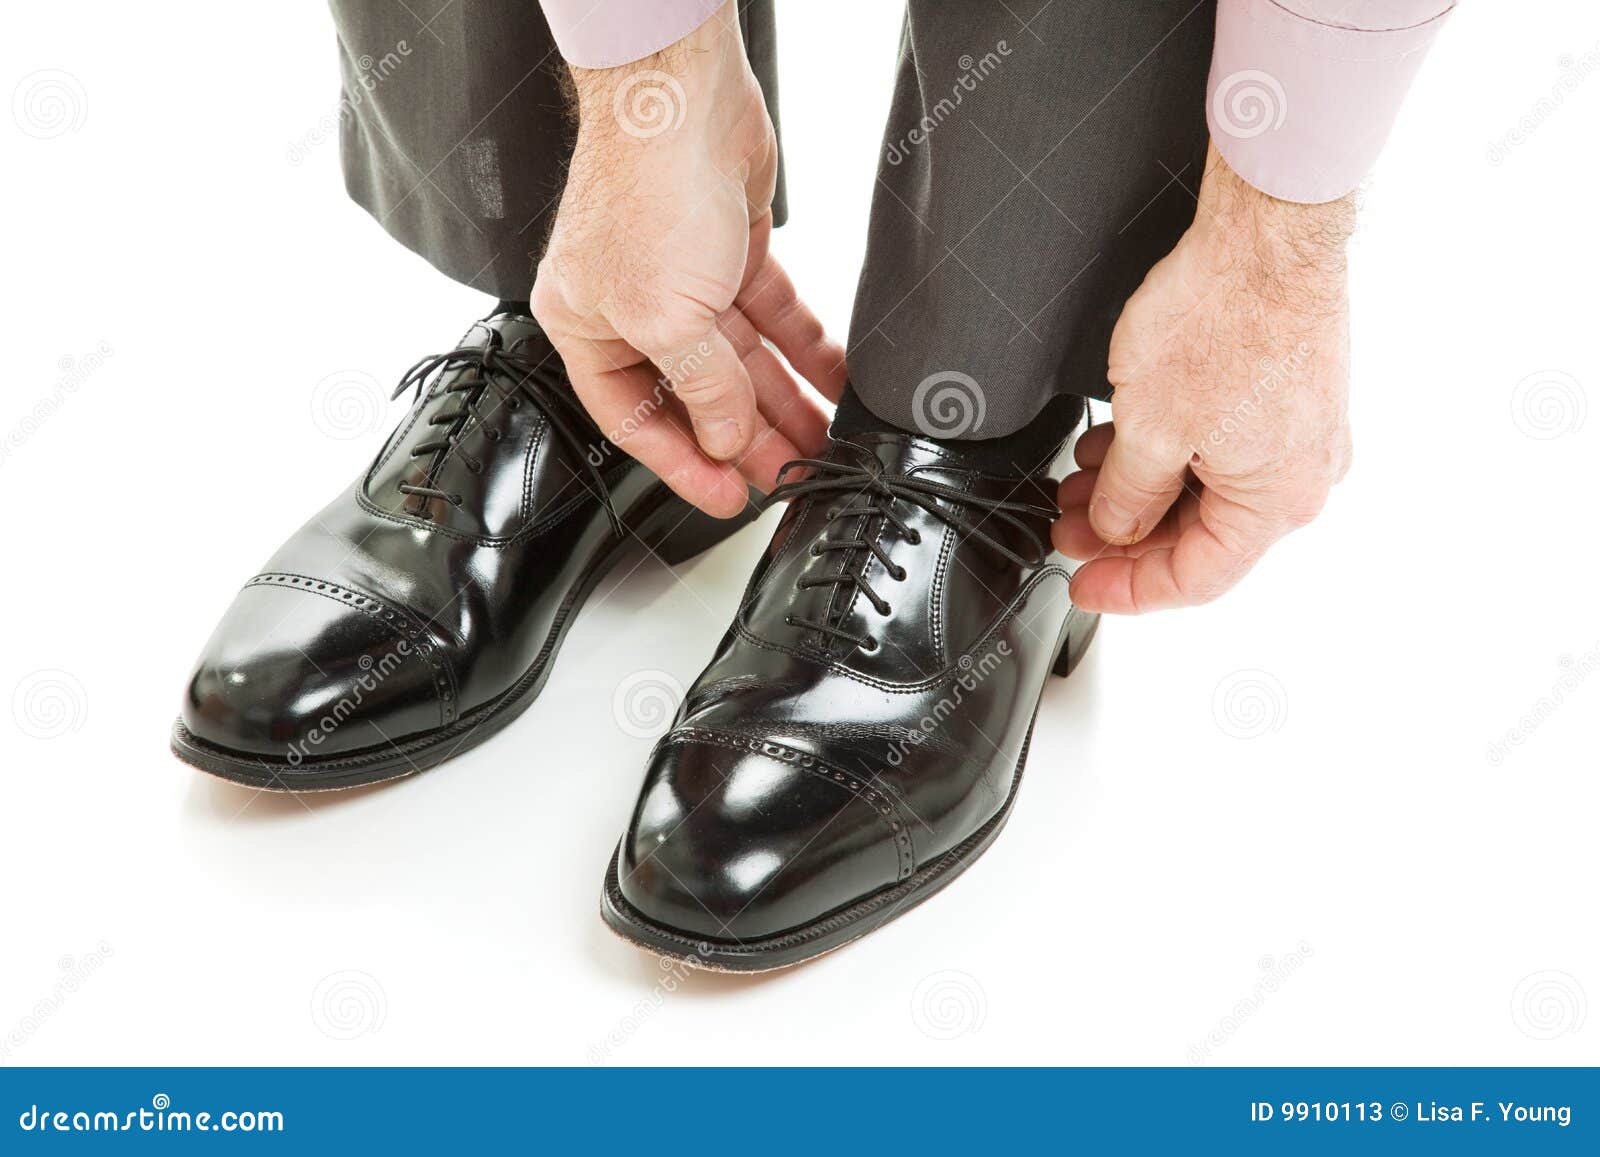 ... ties his shiney new black leather business shoes. Isolated on white